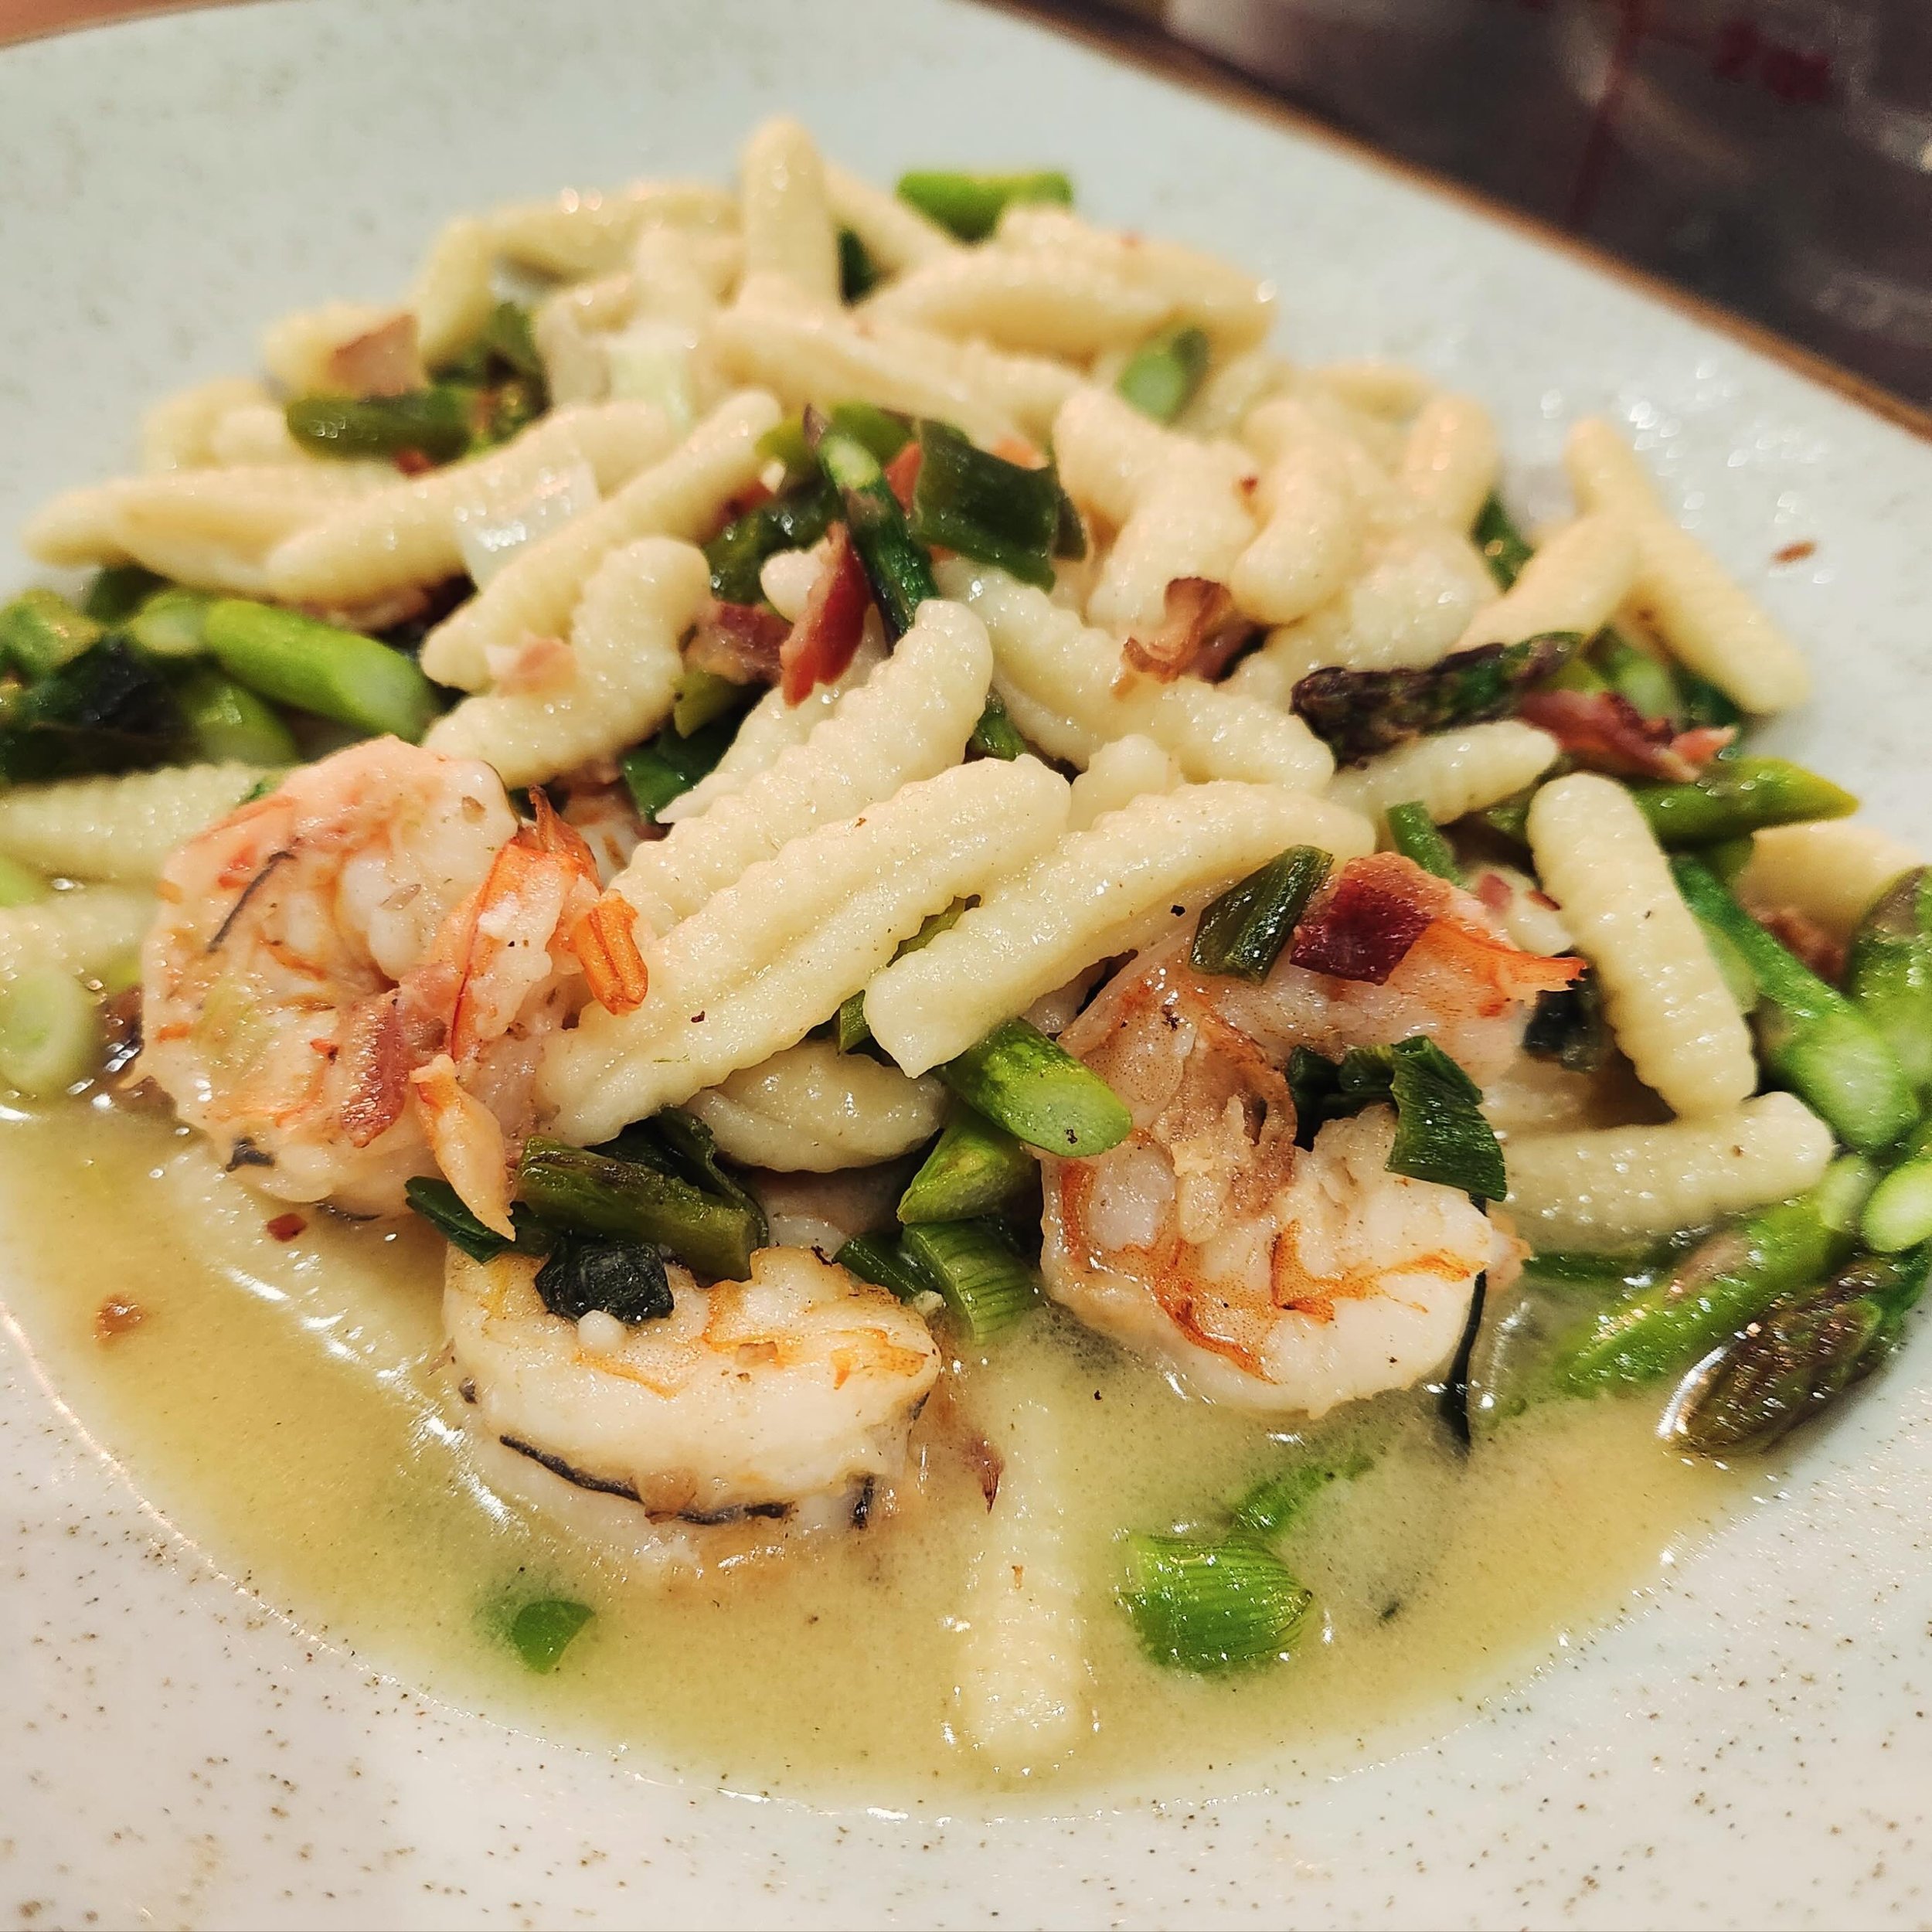 Our shrimp &amp; pasta dish has been a customer favorite this spring. With local NC shrimp and house-made cavatelli it&rsquo;s easy to see why. Come taste for yourself! Served for dinner Tuesday - Sunday. 
.
.
#nccatch #localseafood #freshseafood #ea